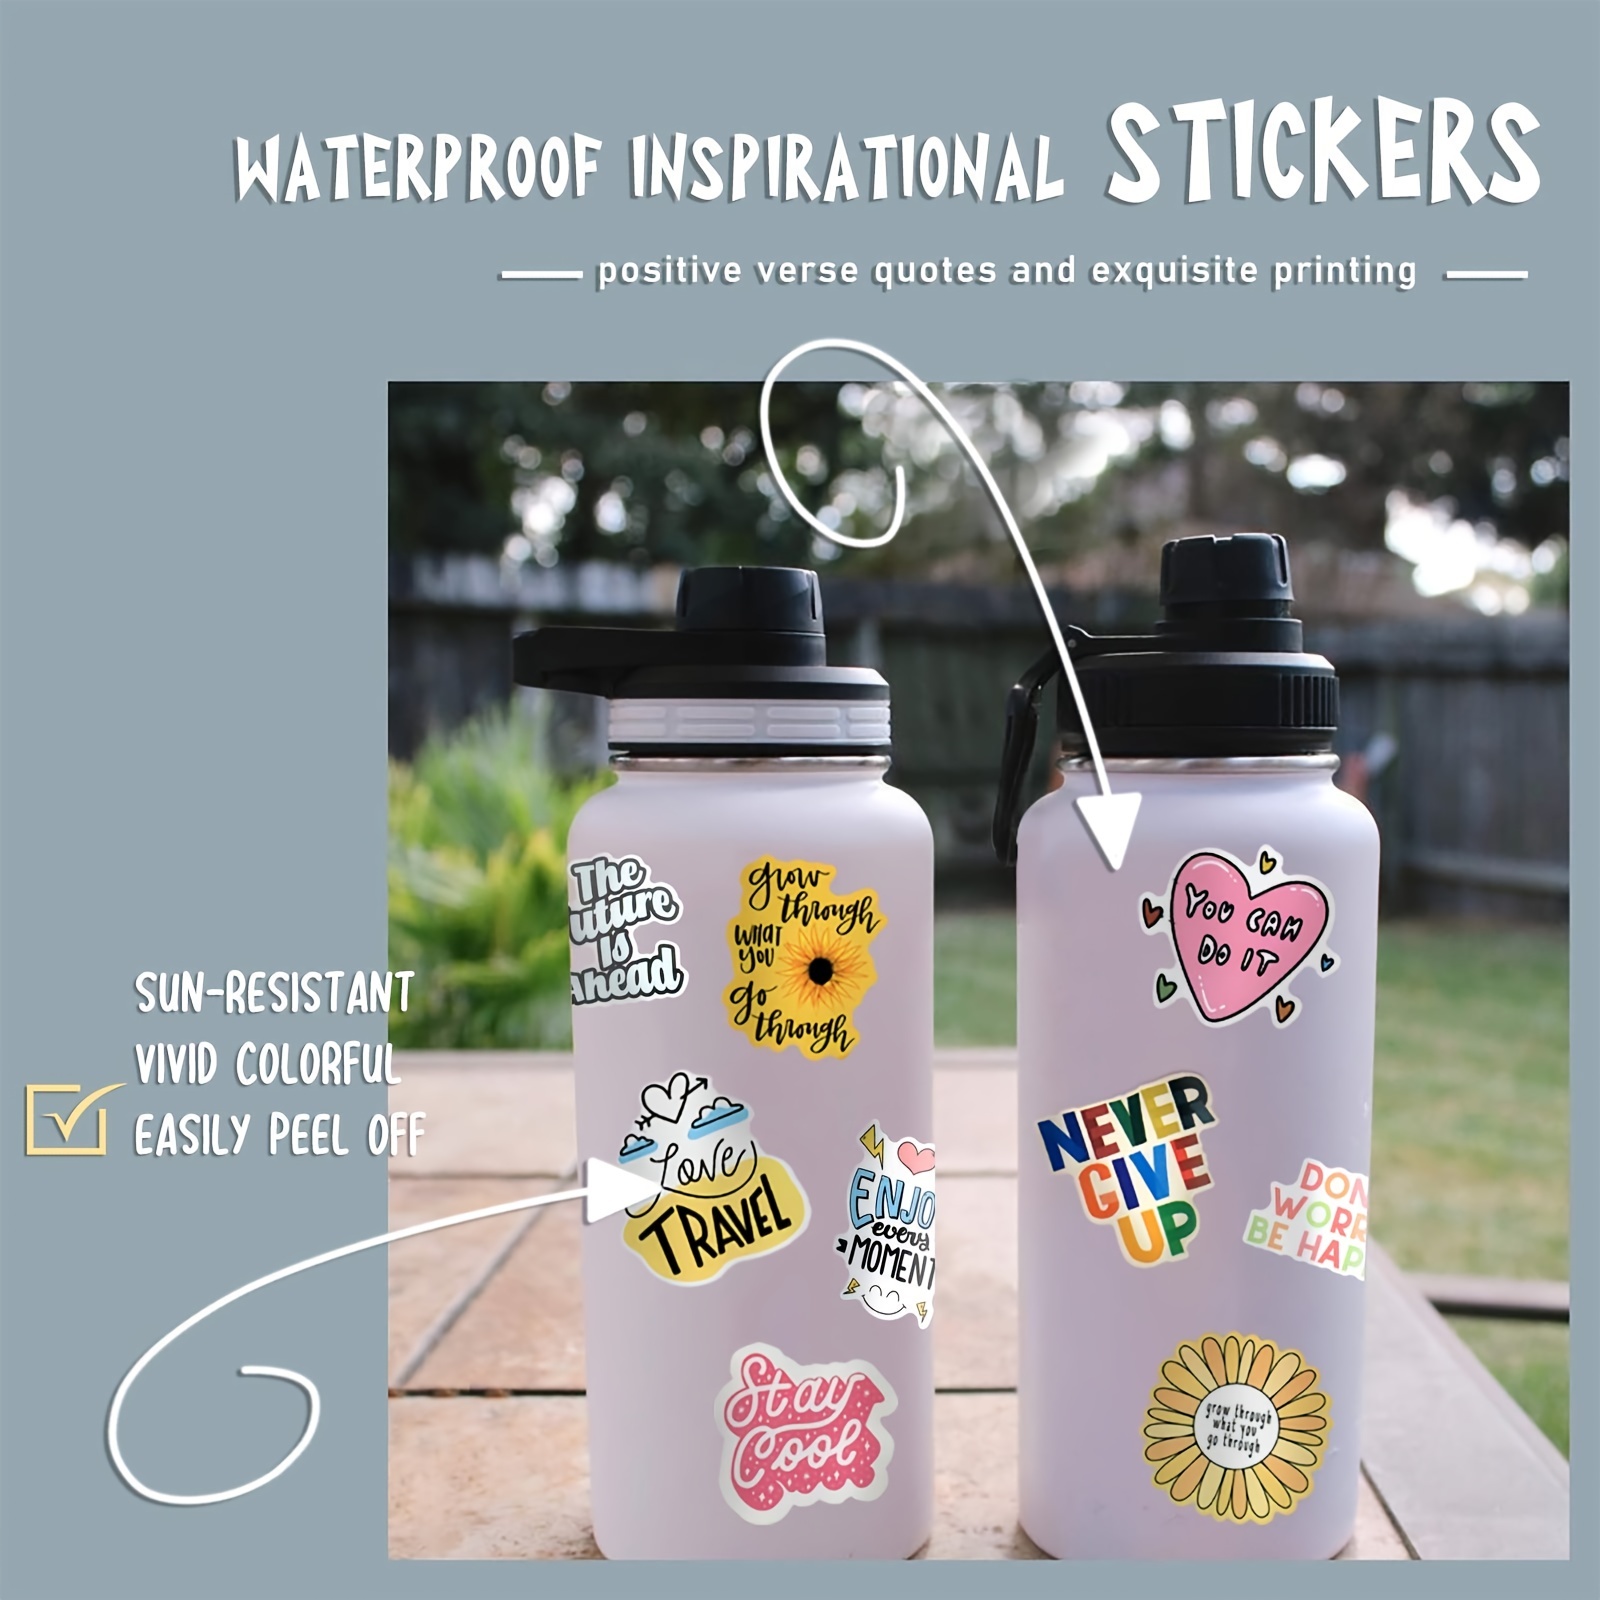 50pcs Inspirational Quote Stickers Vision Board Supplies, Positive Motivational  Stickers For Adults Students Teachers, Vinyl Waterproof Encouraging  Stickers For Water Bottles Laptops Phone Case Scrapbook Envelope